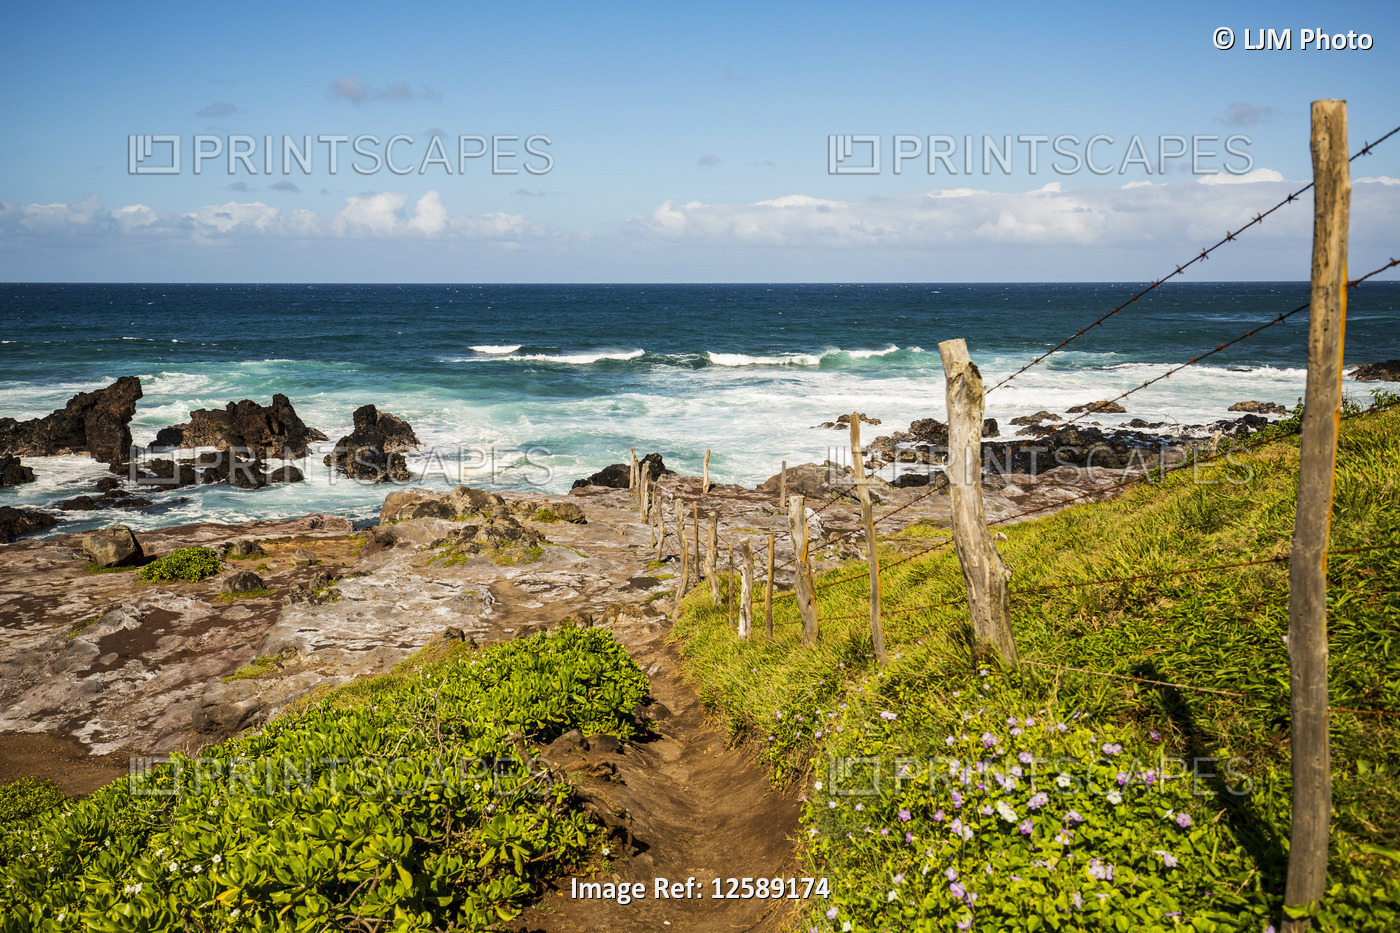 Ocean waves cresting and rollling into the rocky shoreline with a dirt path on ...